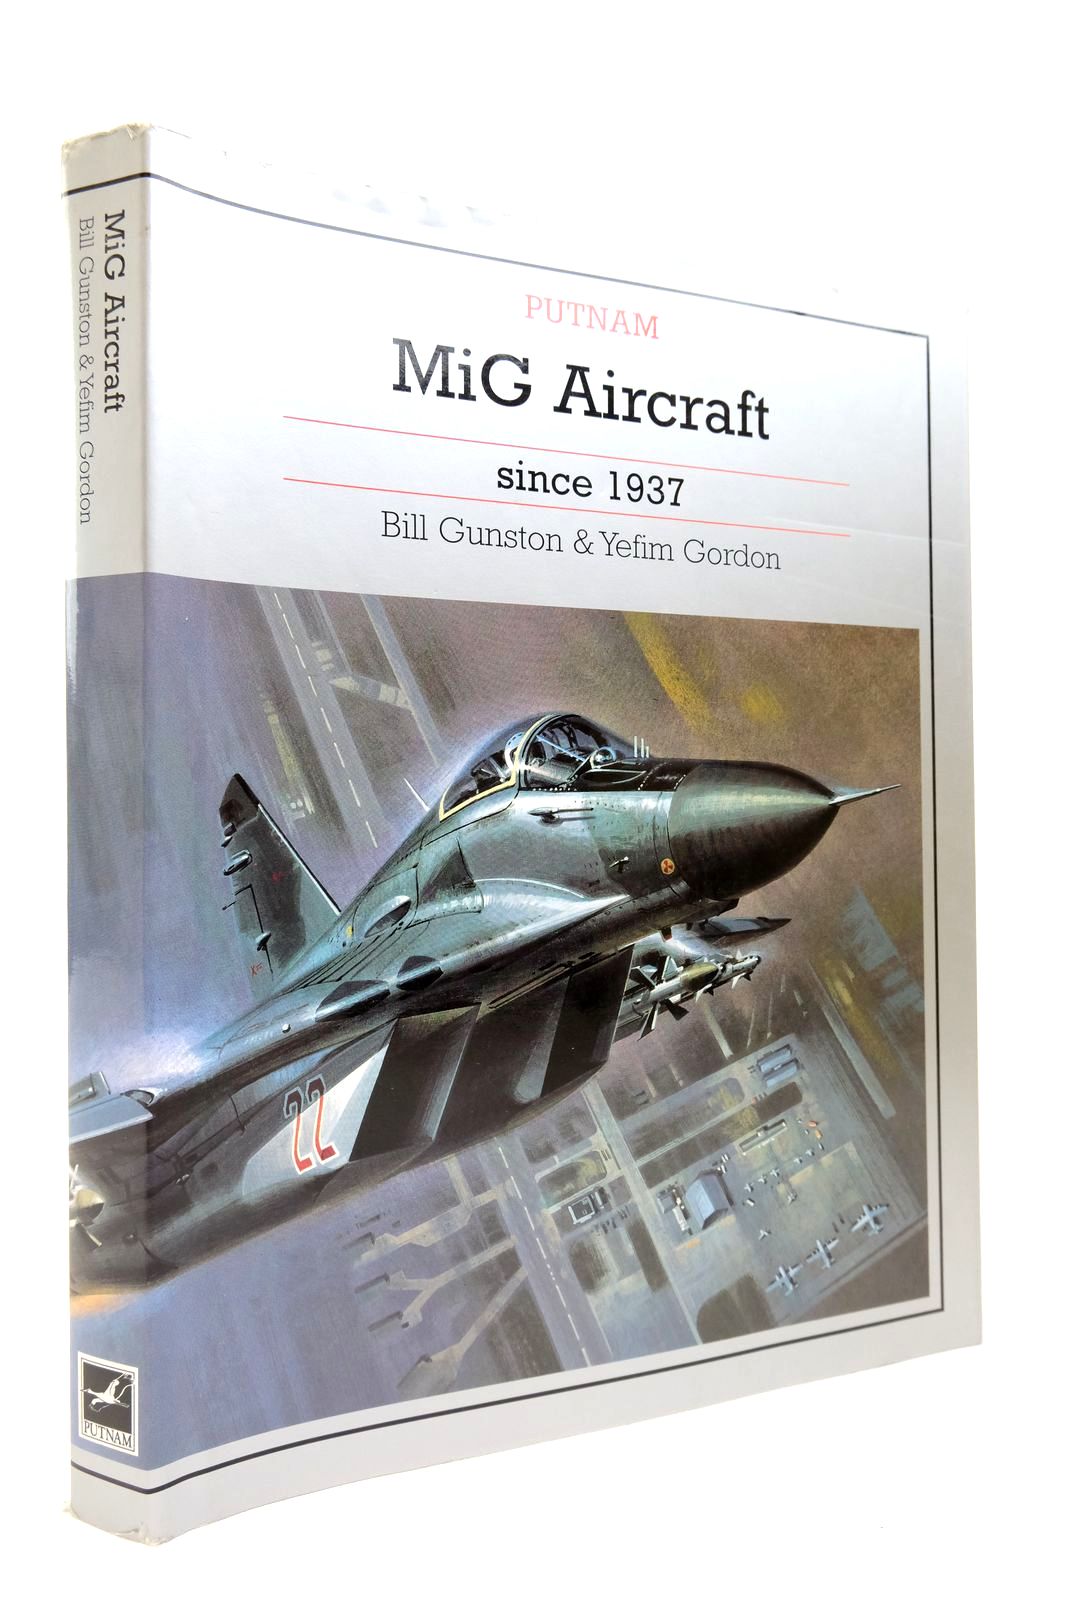 Photo of MIG AIRCRAFT SINCE 1937 written by Gunston, Bill
Gordon, Yefim published by Putnam (STOCK CODE: 2139170)  for sale by Stella & Rose's Books